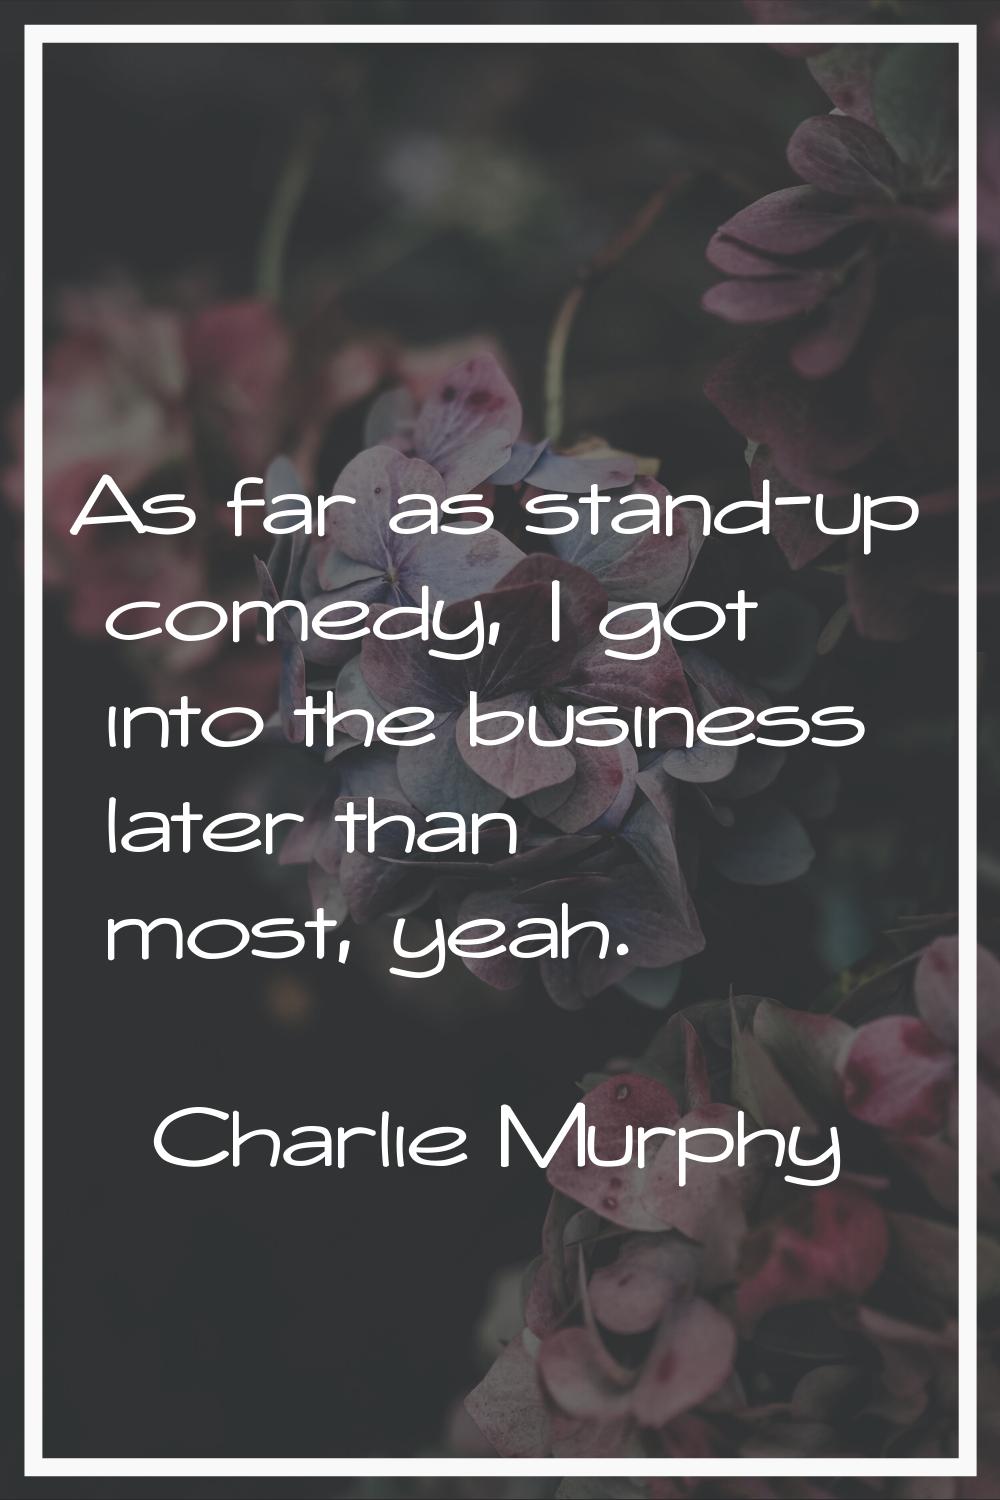 As far as stand-up comedy, I got into the business later than most, yeah.